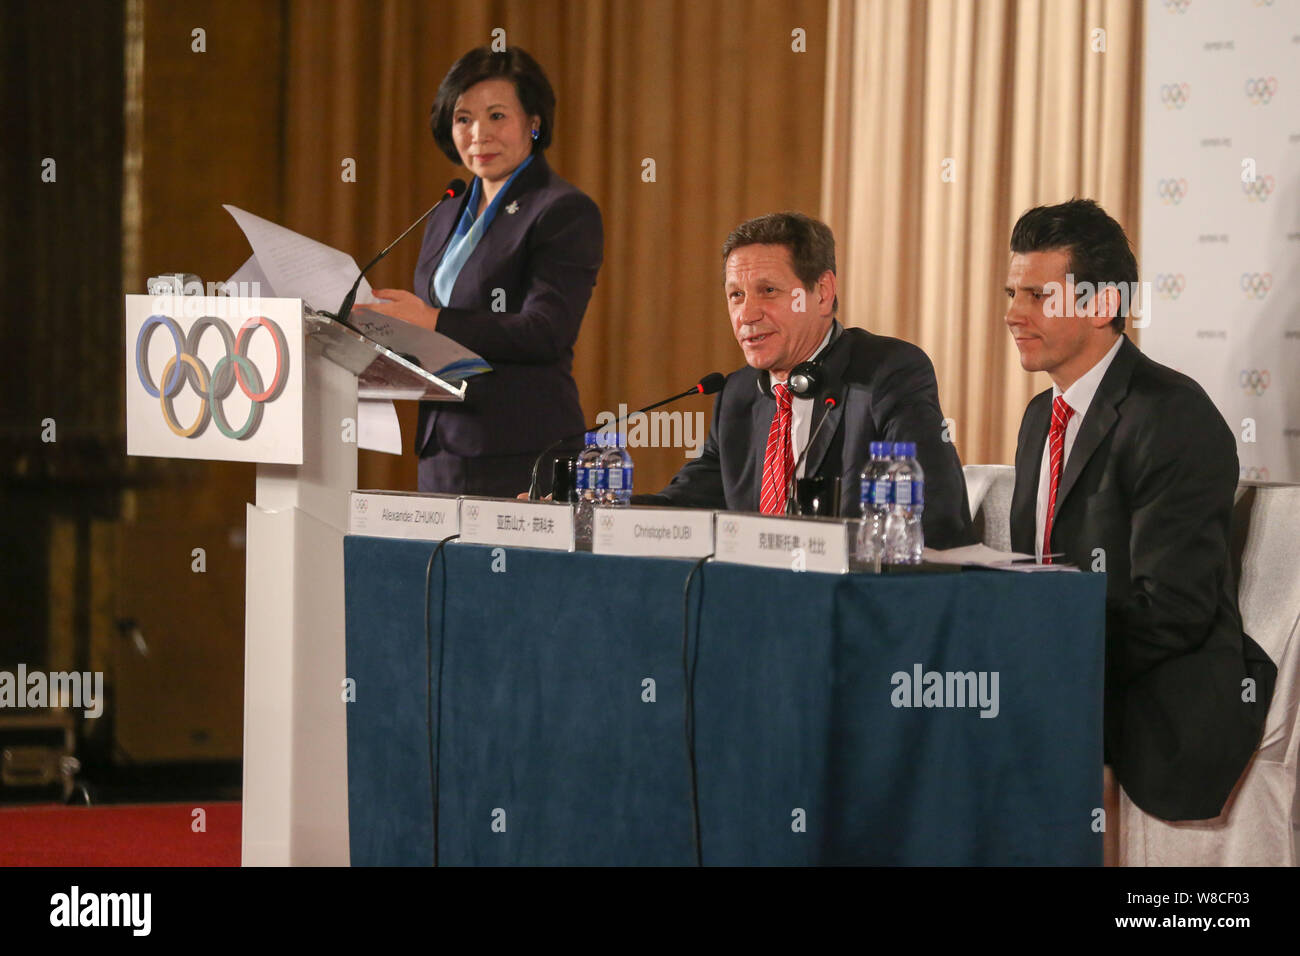 Alexander Zhukov, center, head of the 2022 Evaluation Commission for the International Olympic Committee (IOC), speaks next to Christophe Dubi, right, Stock Photo